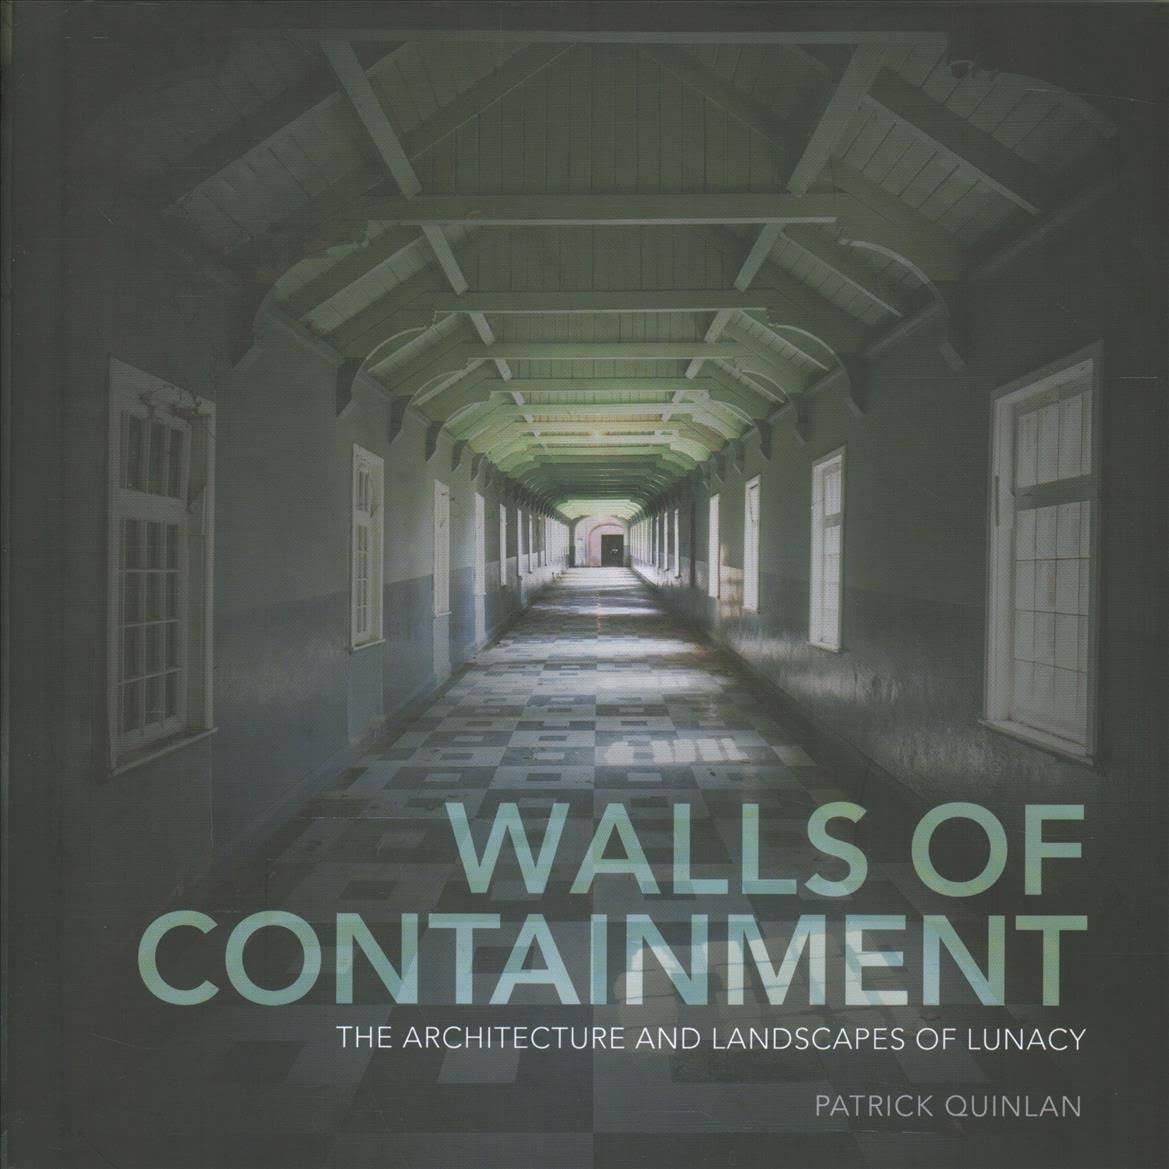 Walls of Containment by Patrick Quinlan